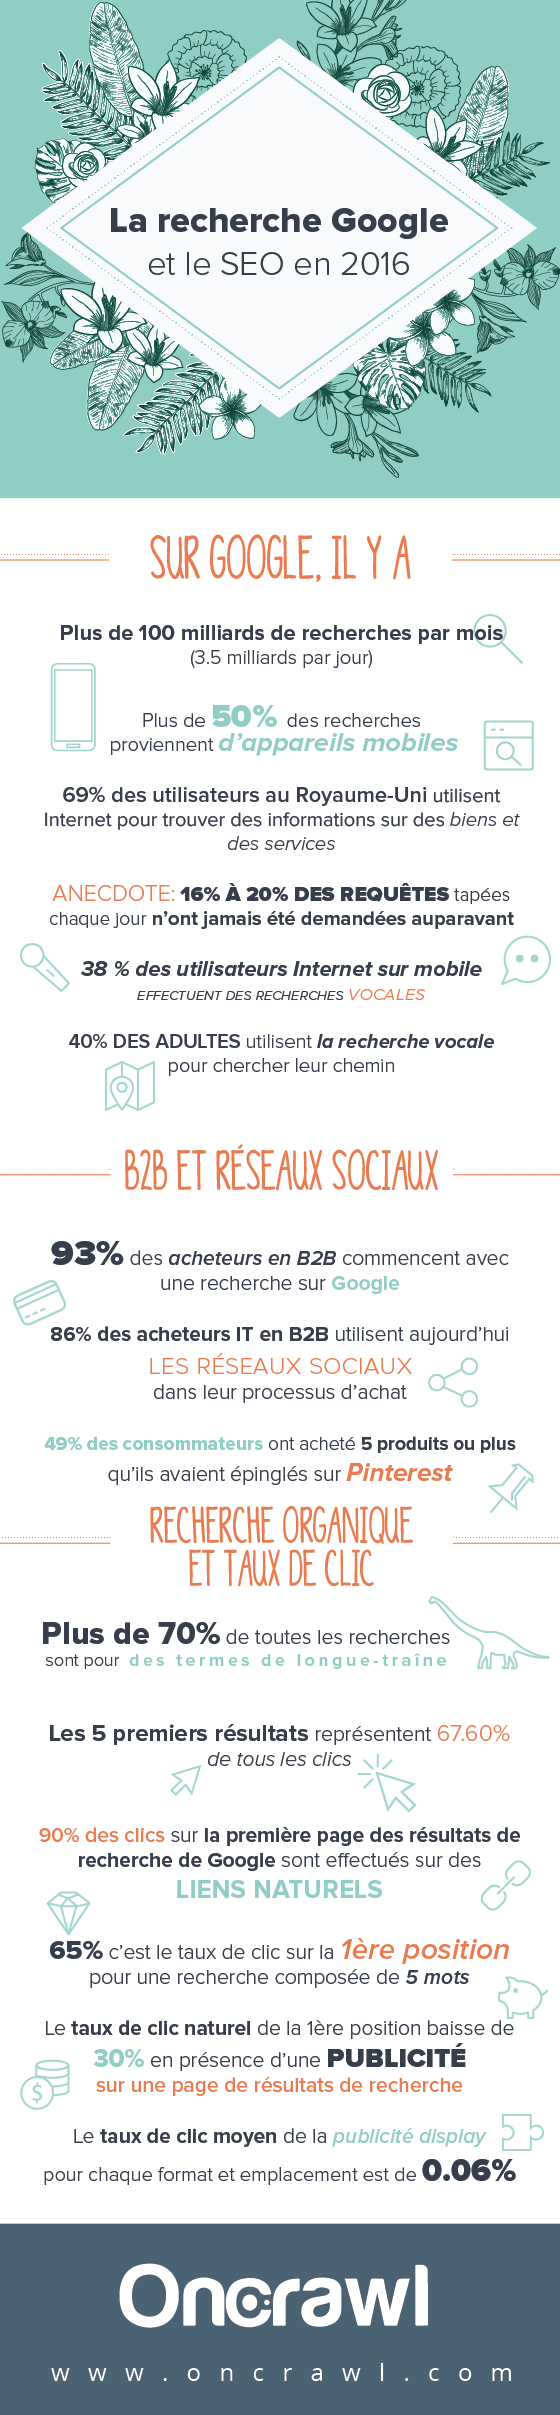 infographie-google-search-seo-2016